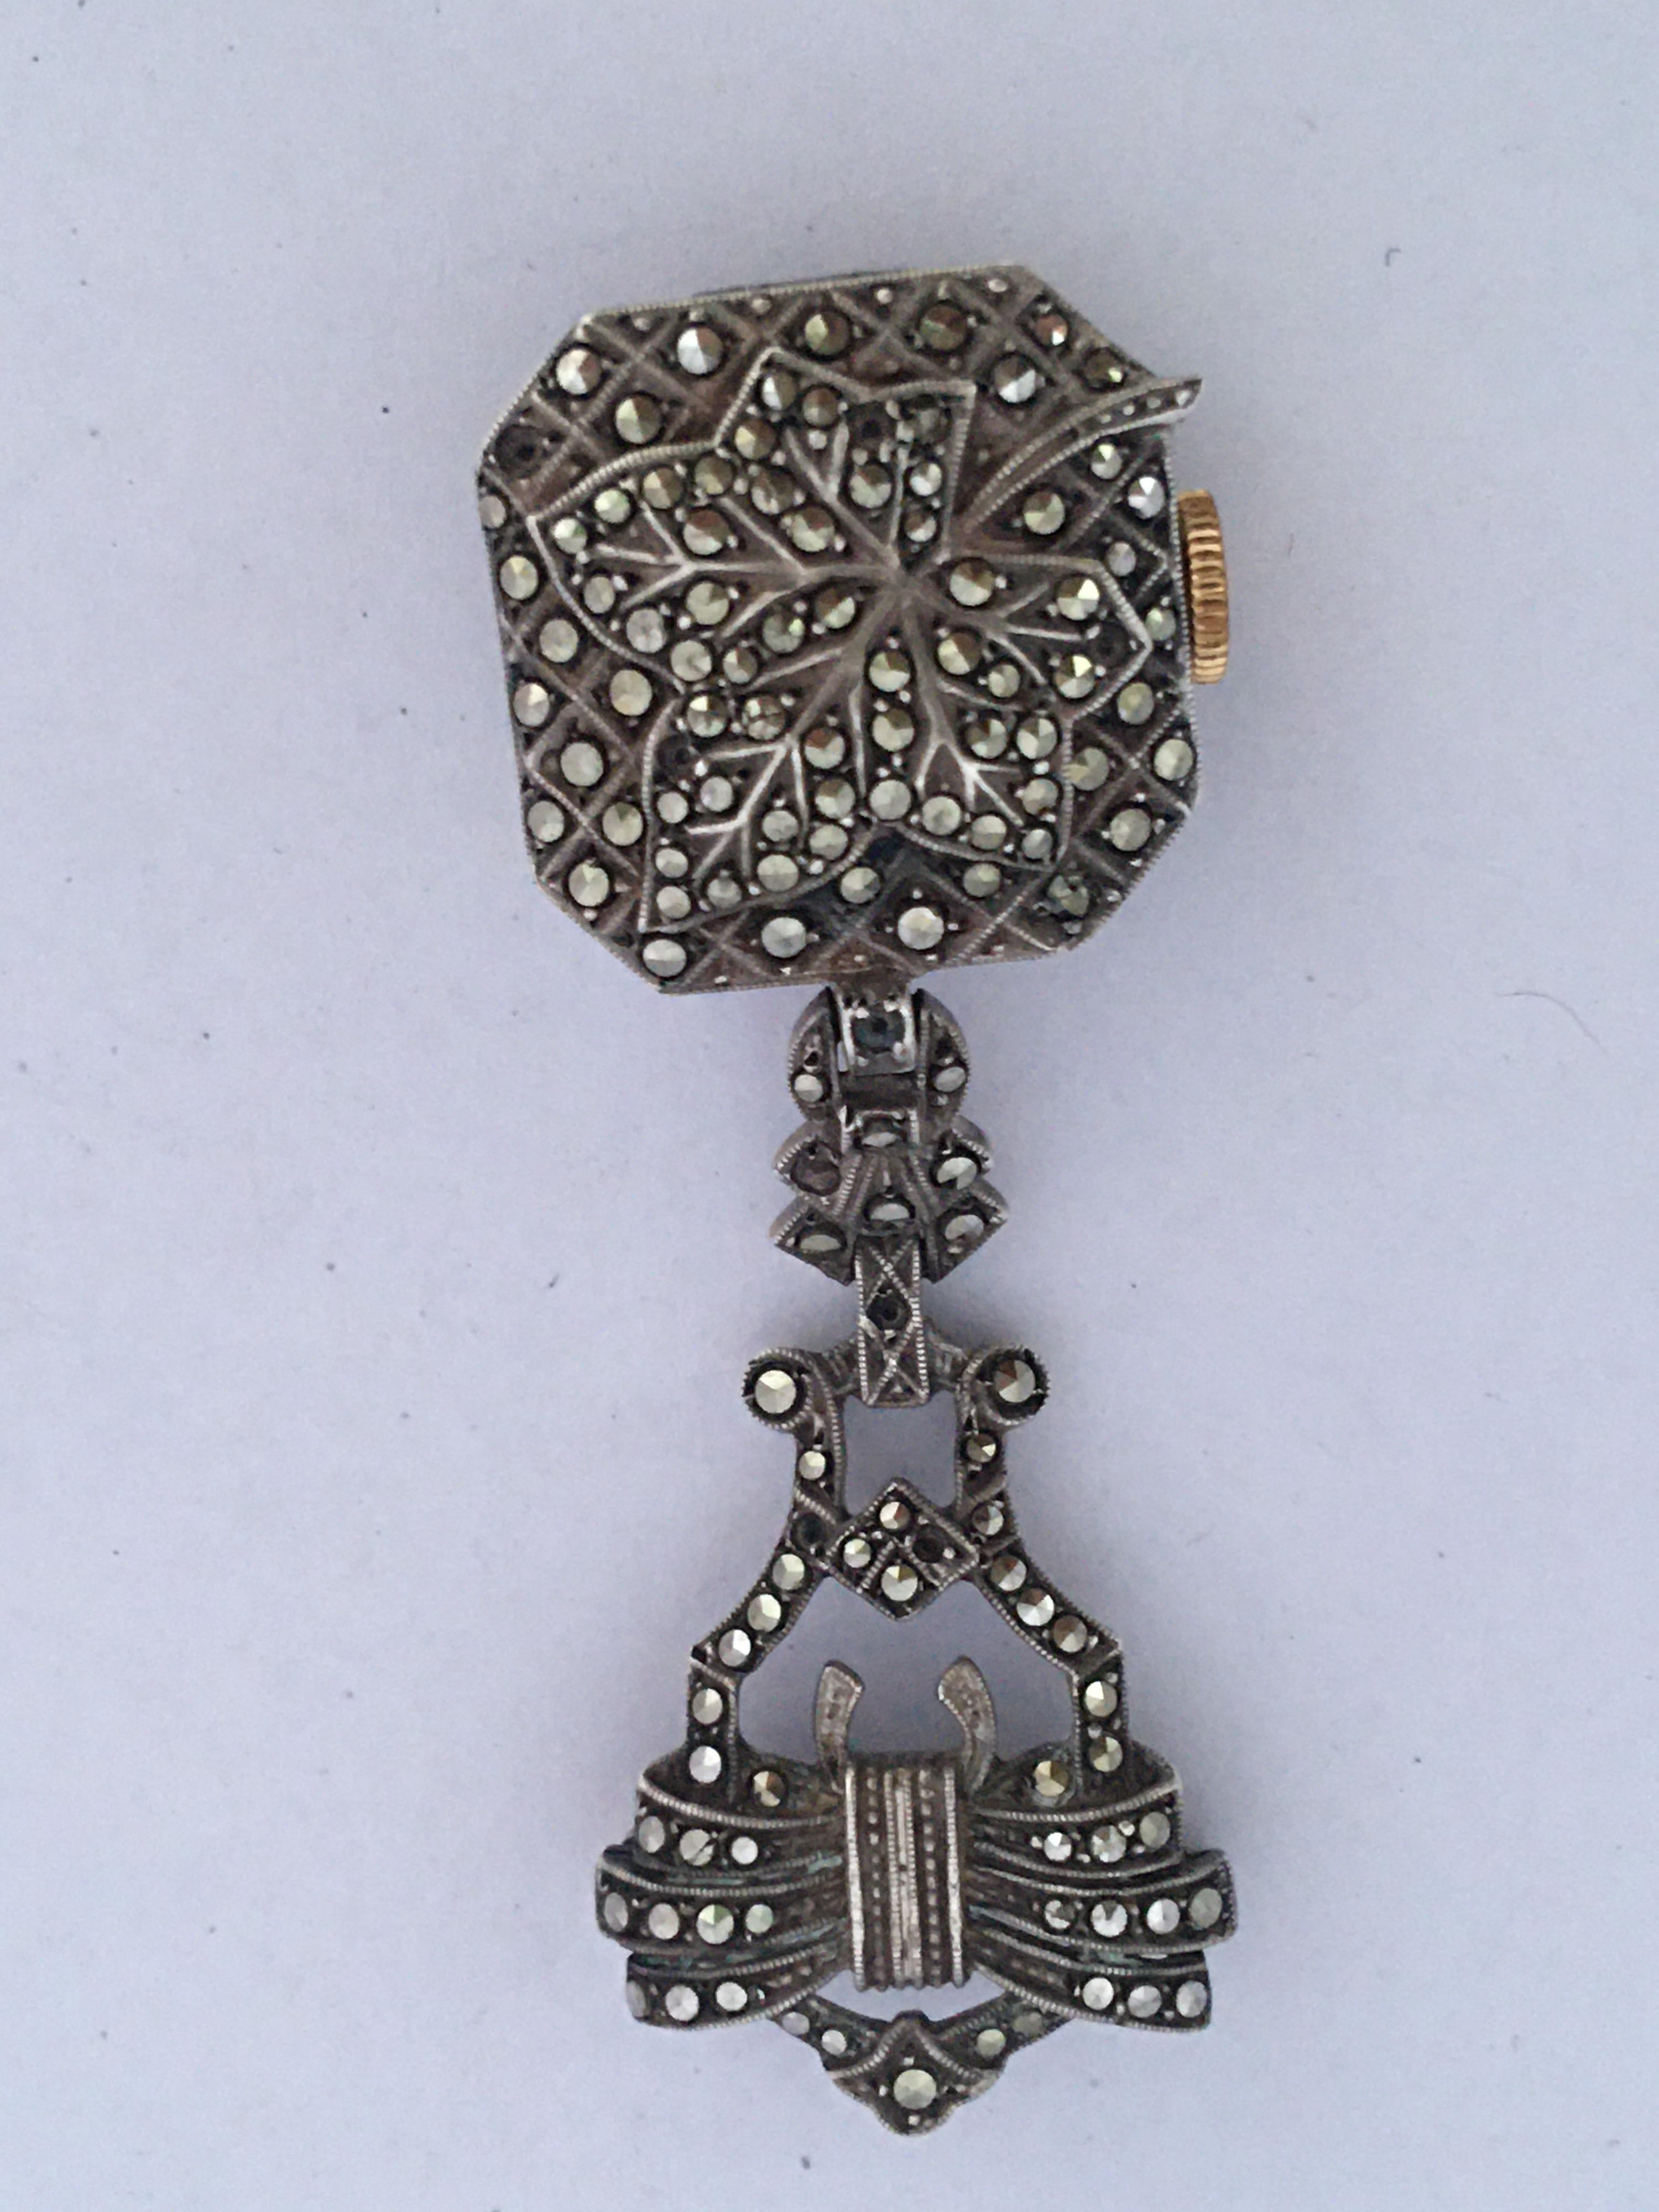 Antique Silver and Marcasite Nurse’s / Brooch Watch For Sale at 1stDibs ...